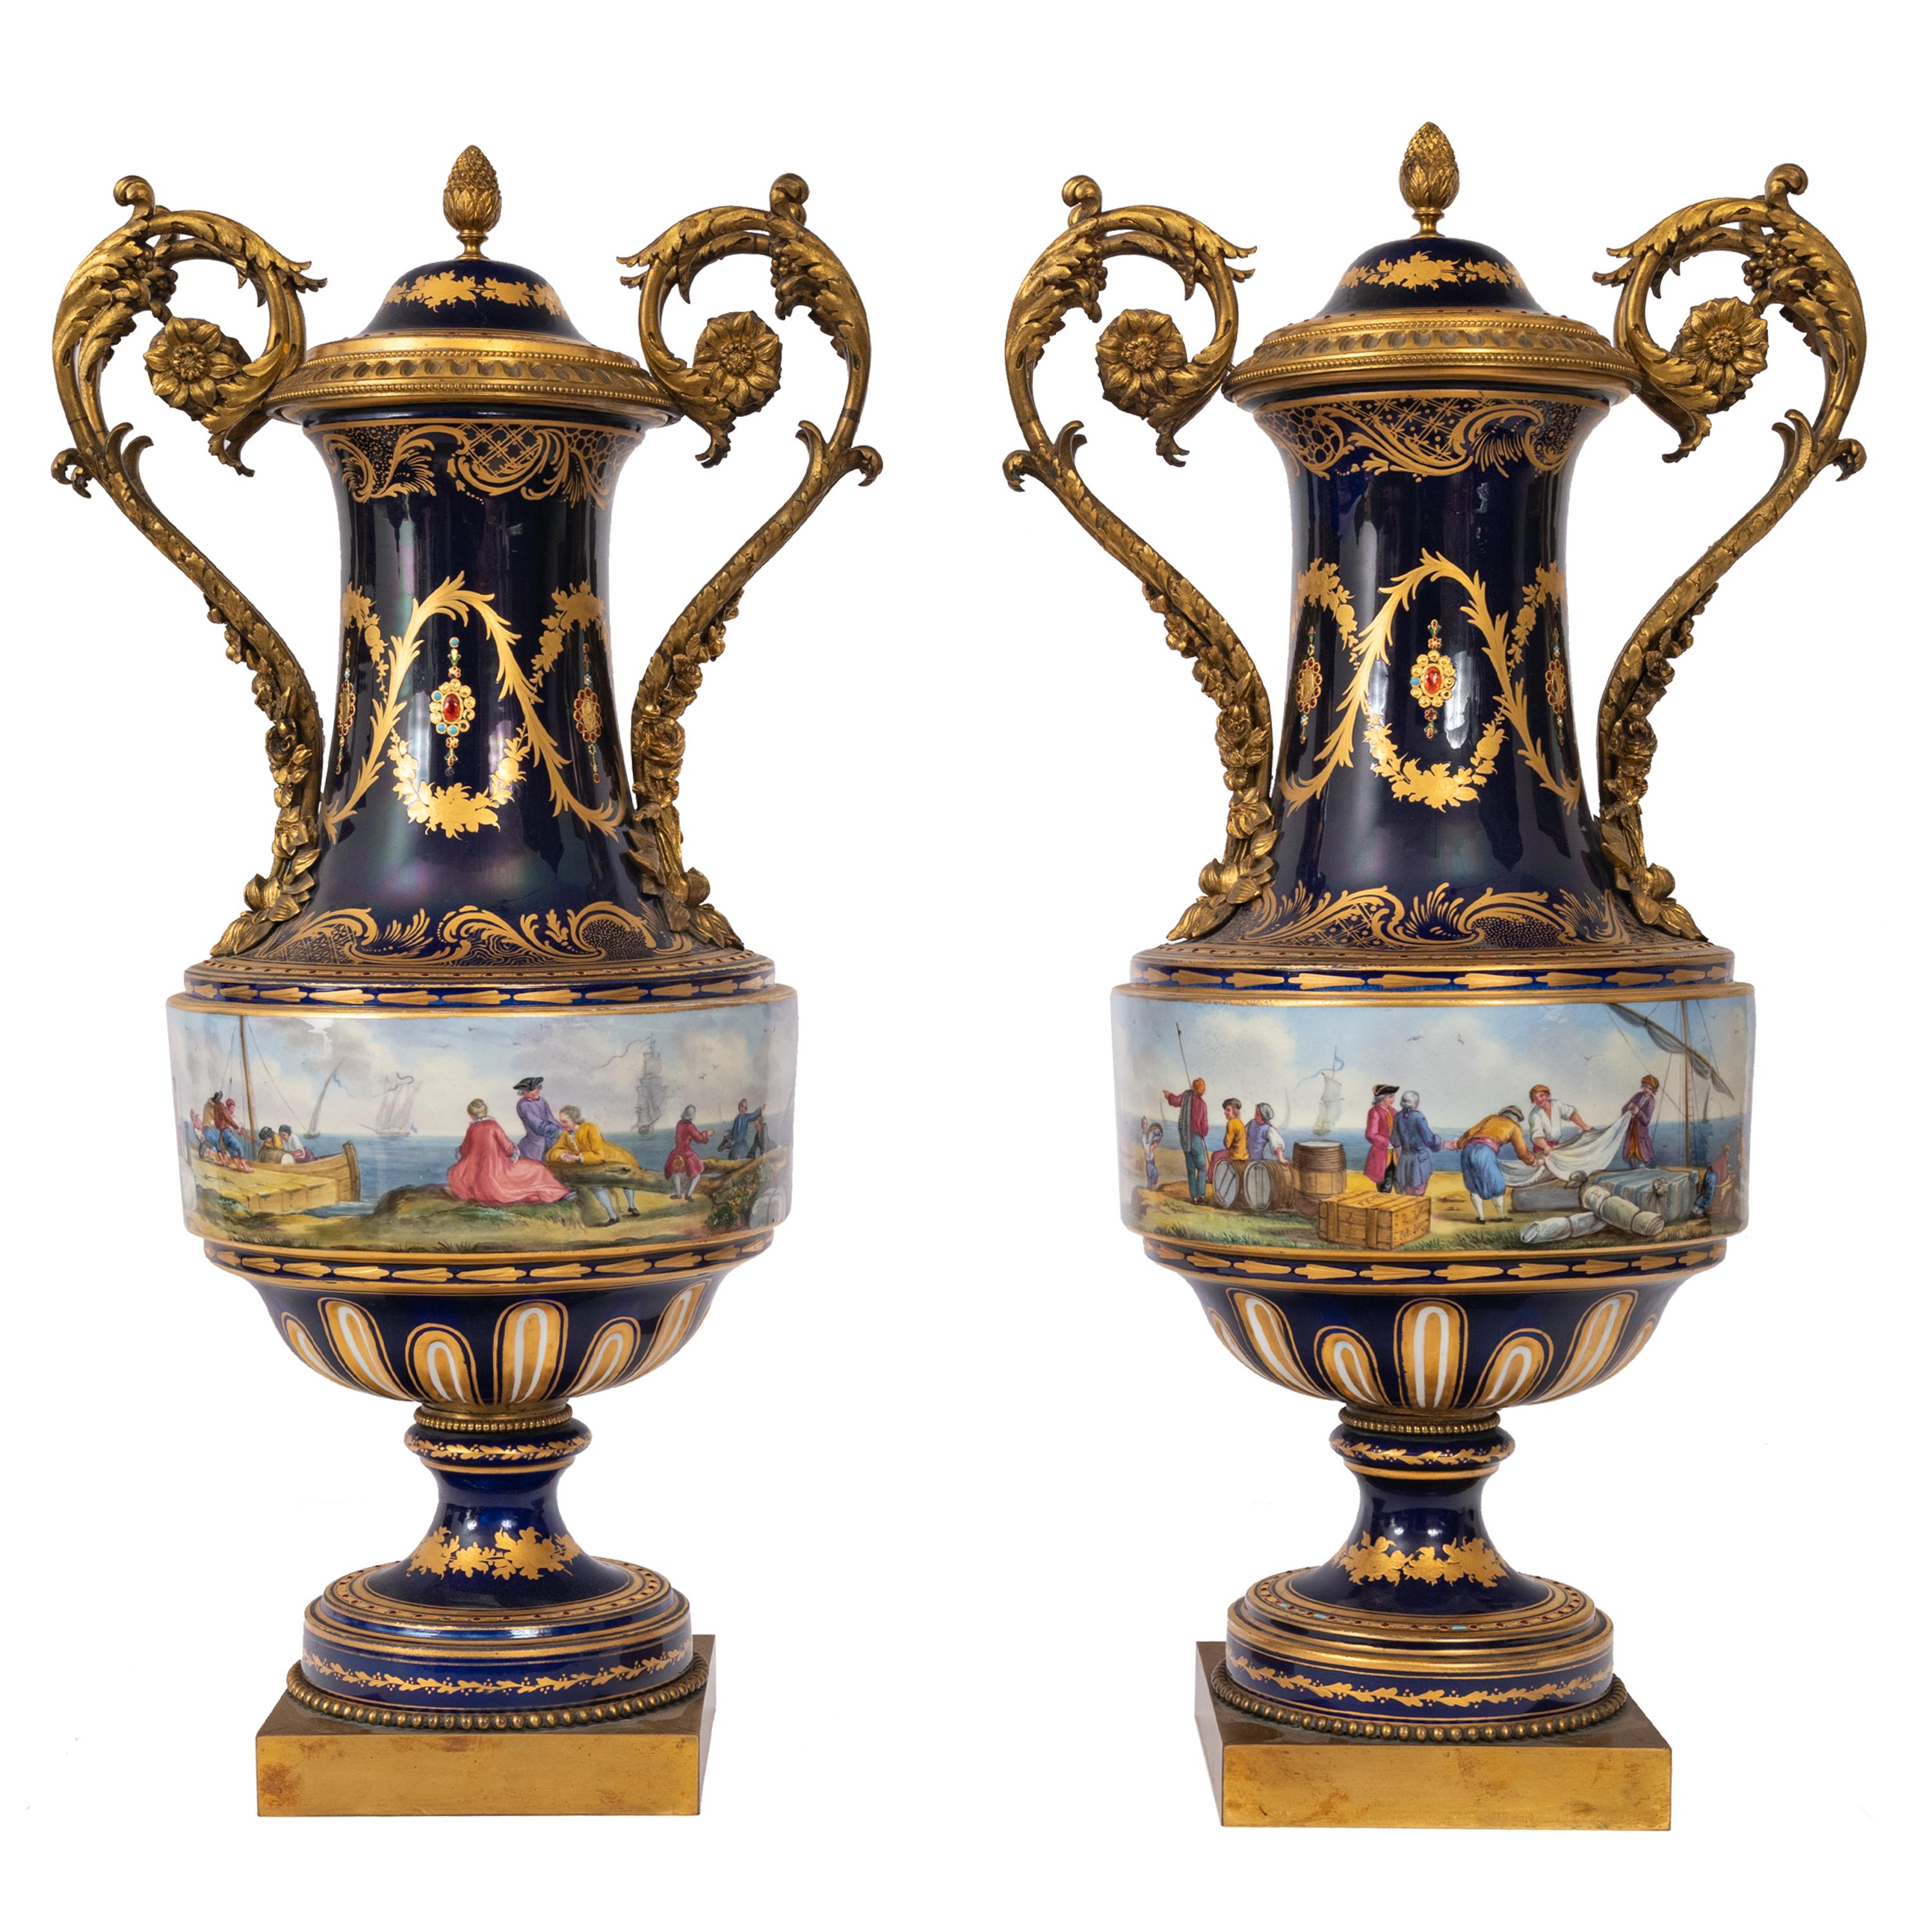 An exceptional & monumental pair of antique Sevres style porcelain & ormolu handpainted lidded urns, circa 1860.
Each urn having a cobalt blue ground with a domed top lid mounted with an ormolu 'pineapple' finial, below are twin ormolu handles with